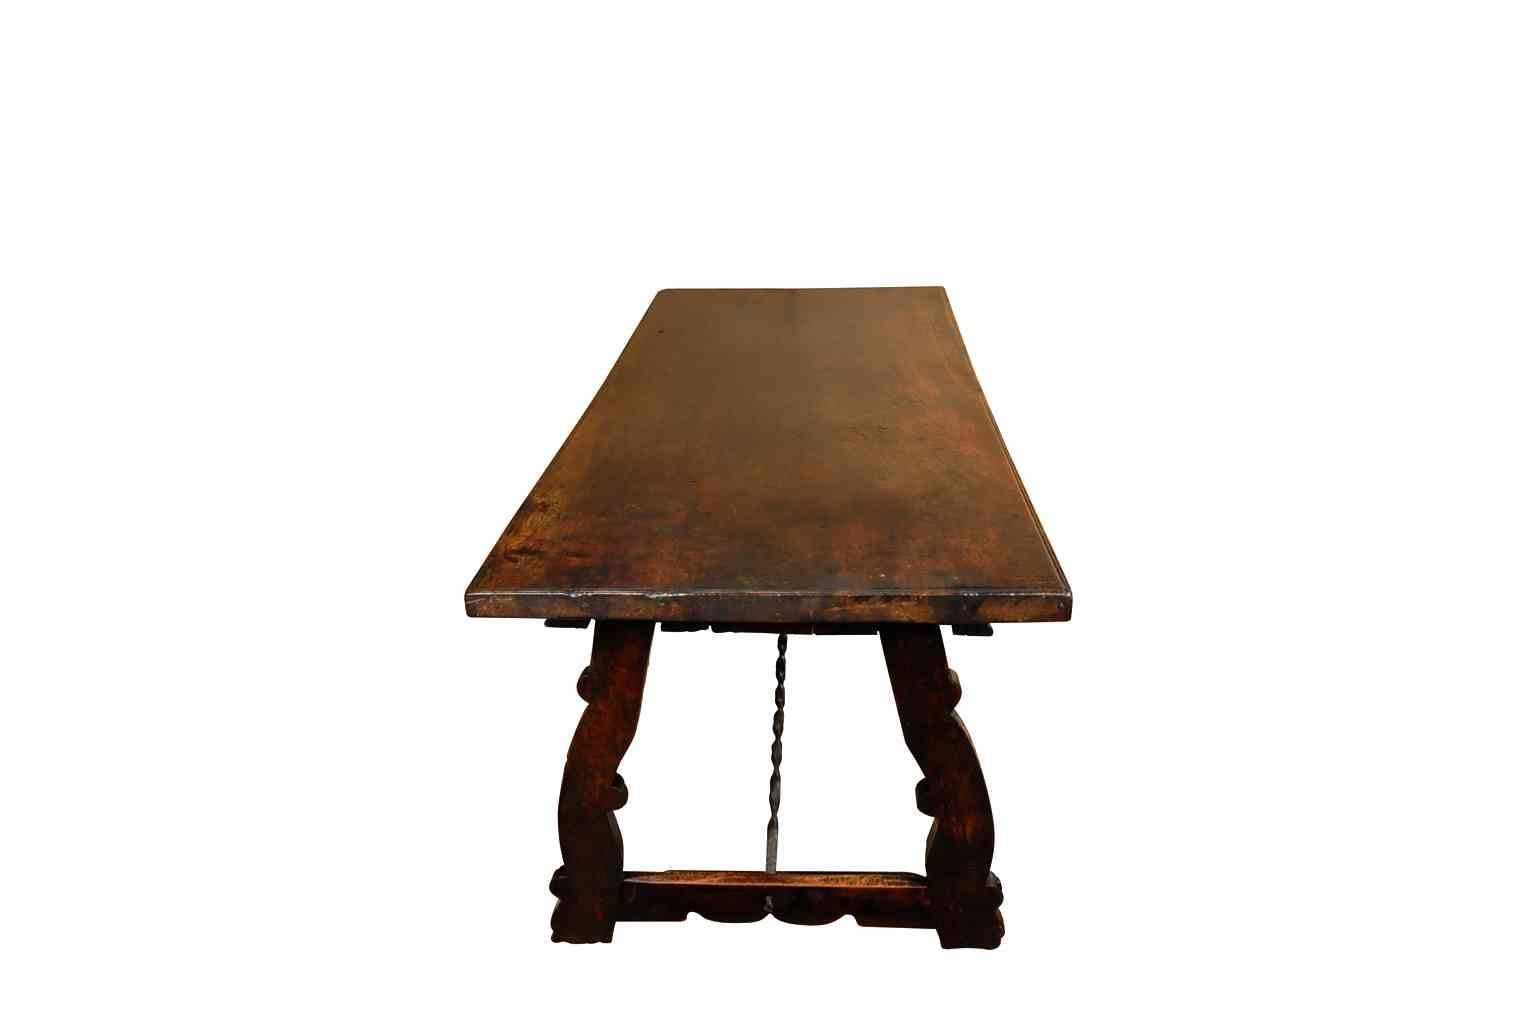 Iron Outstanding Spanish 17th Century Table or Desk